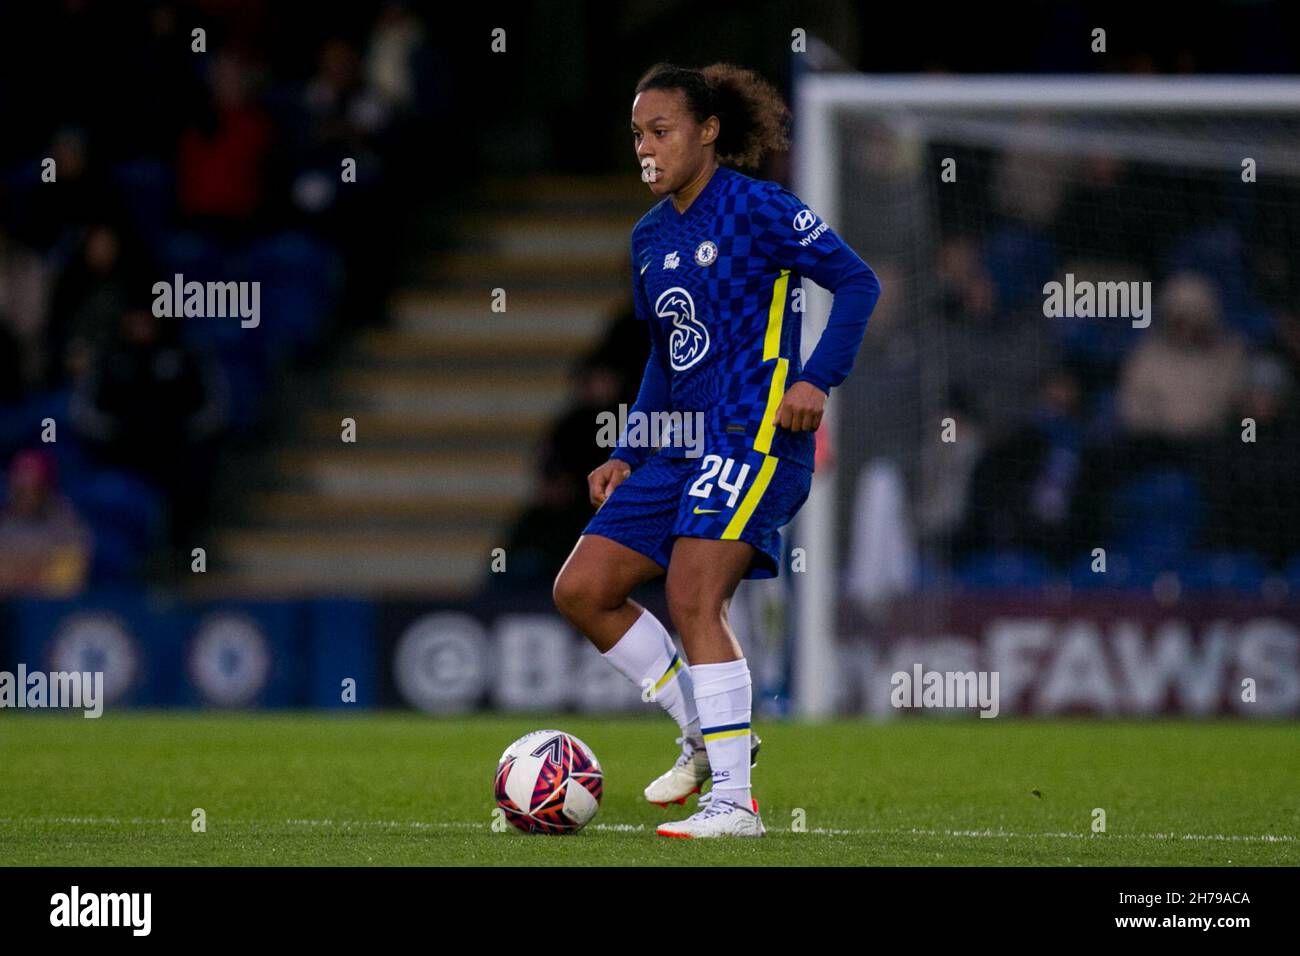 London, UK. 21st Nov, 2021. LONDON, UK. NOVEMBER 21ST : Drew Spence of Chelsea FC controls the ball during the 2021-22 FA Womens Superleague fixture between Chelsea FC and Birmingham City at Kingsmeadow. Credit: Federico Guerra Morán/Alamy Live News Stock Photo